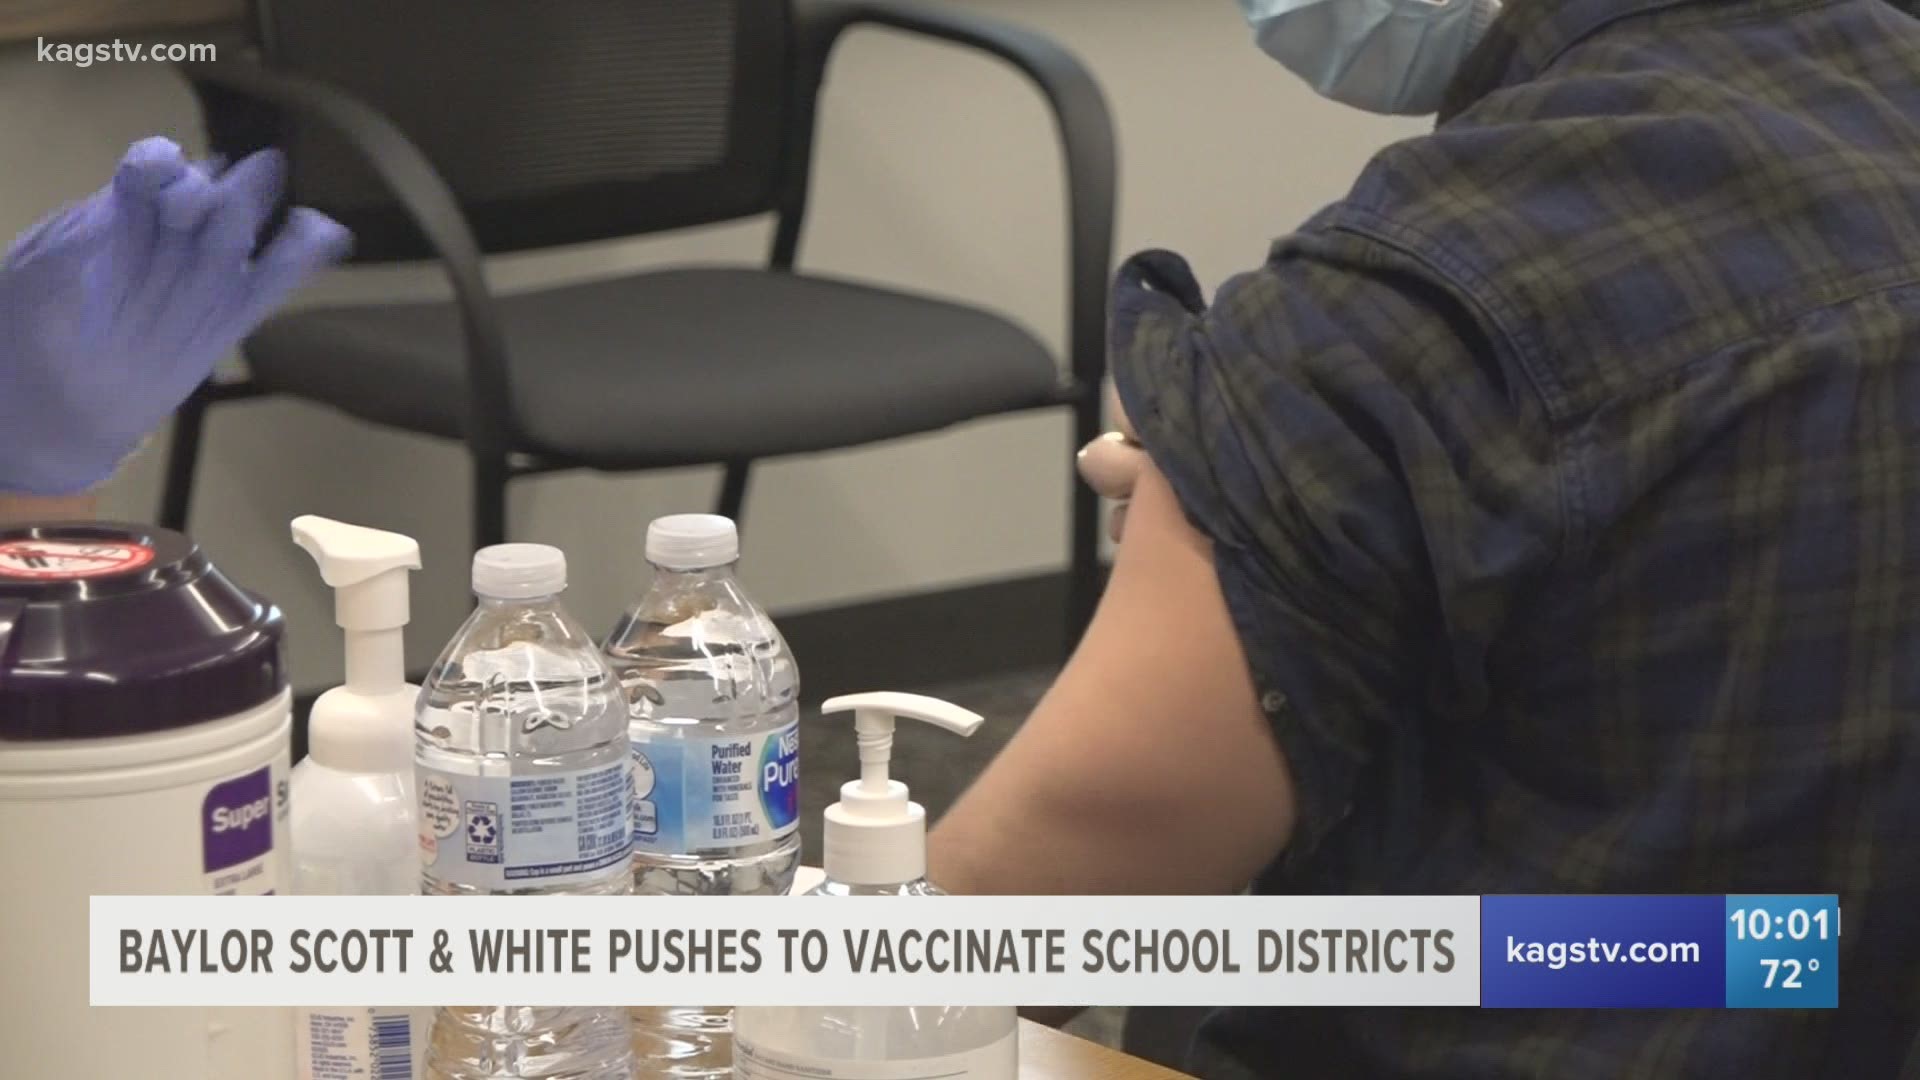 The Brazos Valley hospital will vaccinate teachers in Bryan ISD and College Station ISD over the next week.